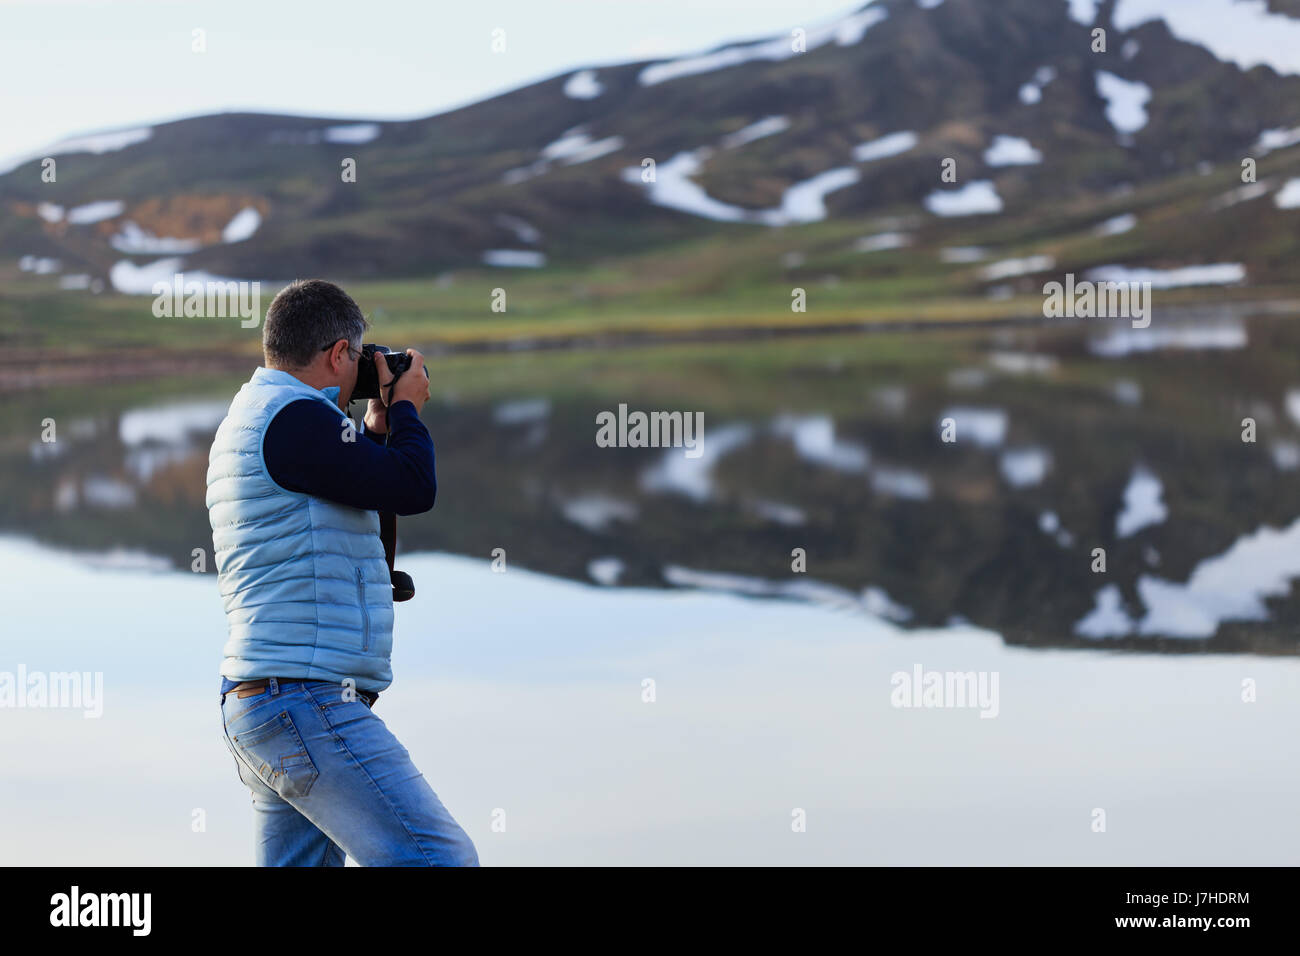 Horizontal sideview portrait of landscape photographer wearing blue jeans and pale blue vest photographing reflections of mountains with melting snow  Stock Photo